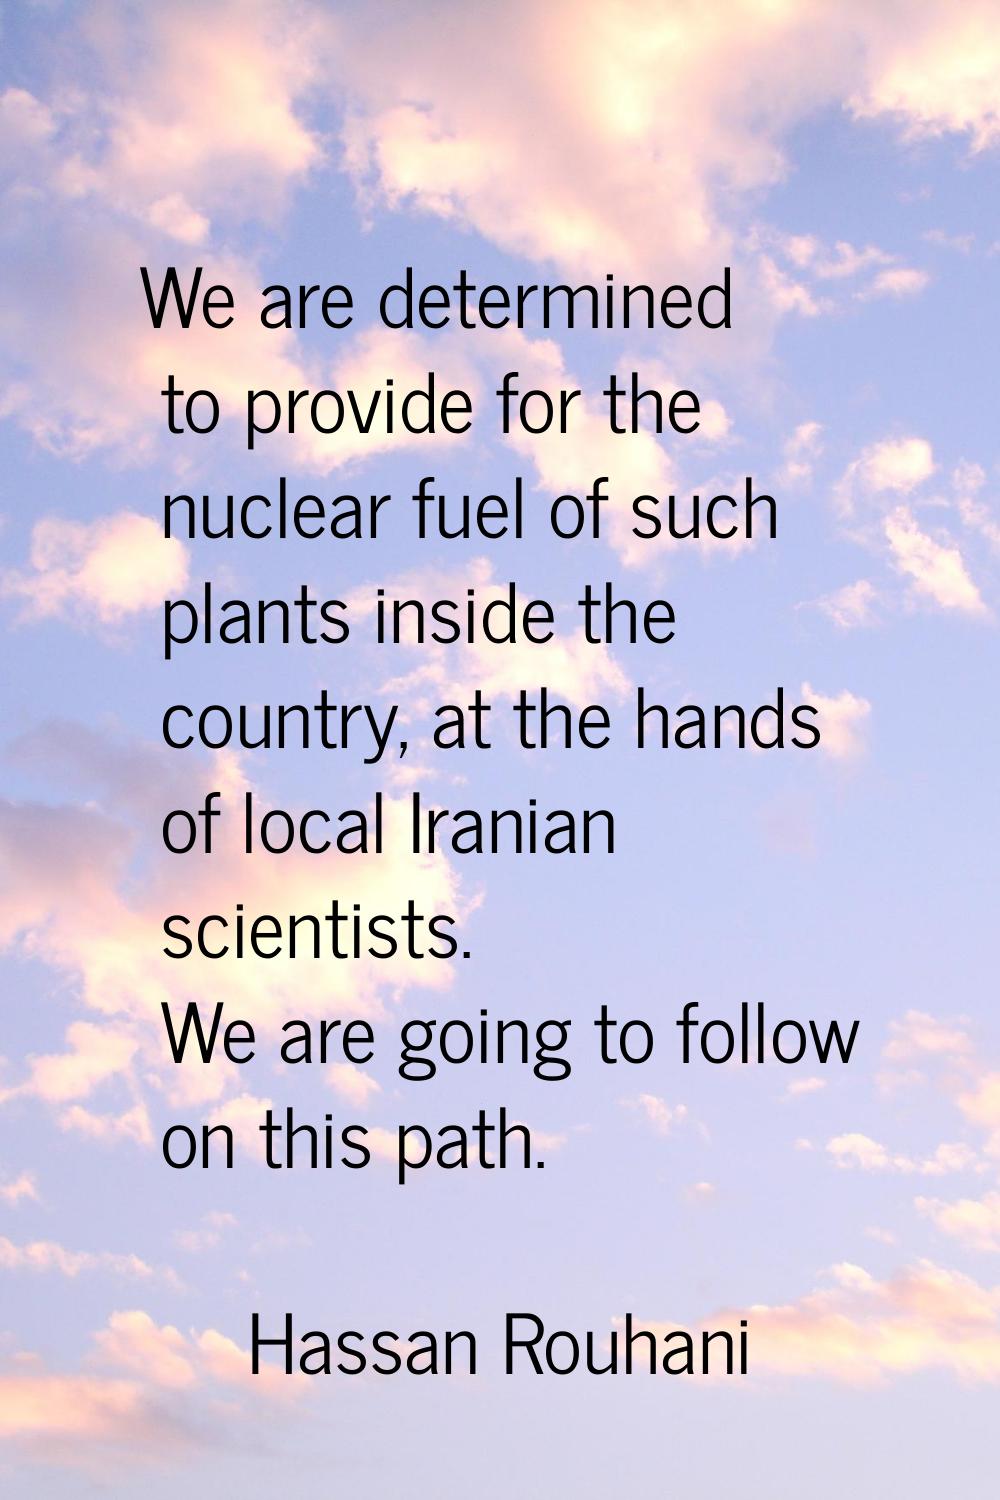 We are determined to provide for the nuclear fuel of such plants inside the country, at the hands o